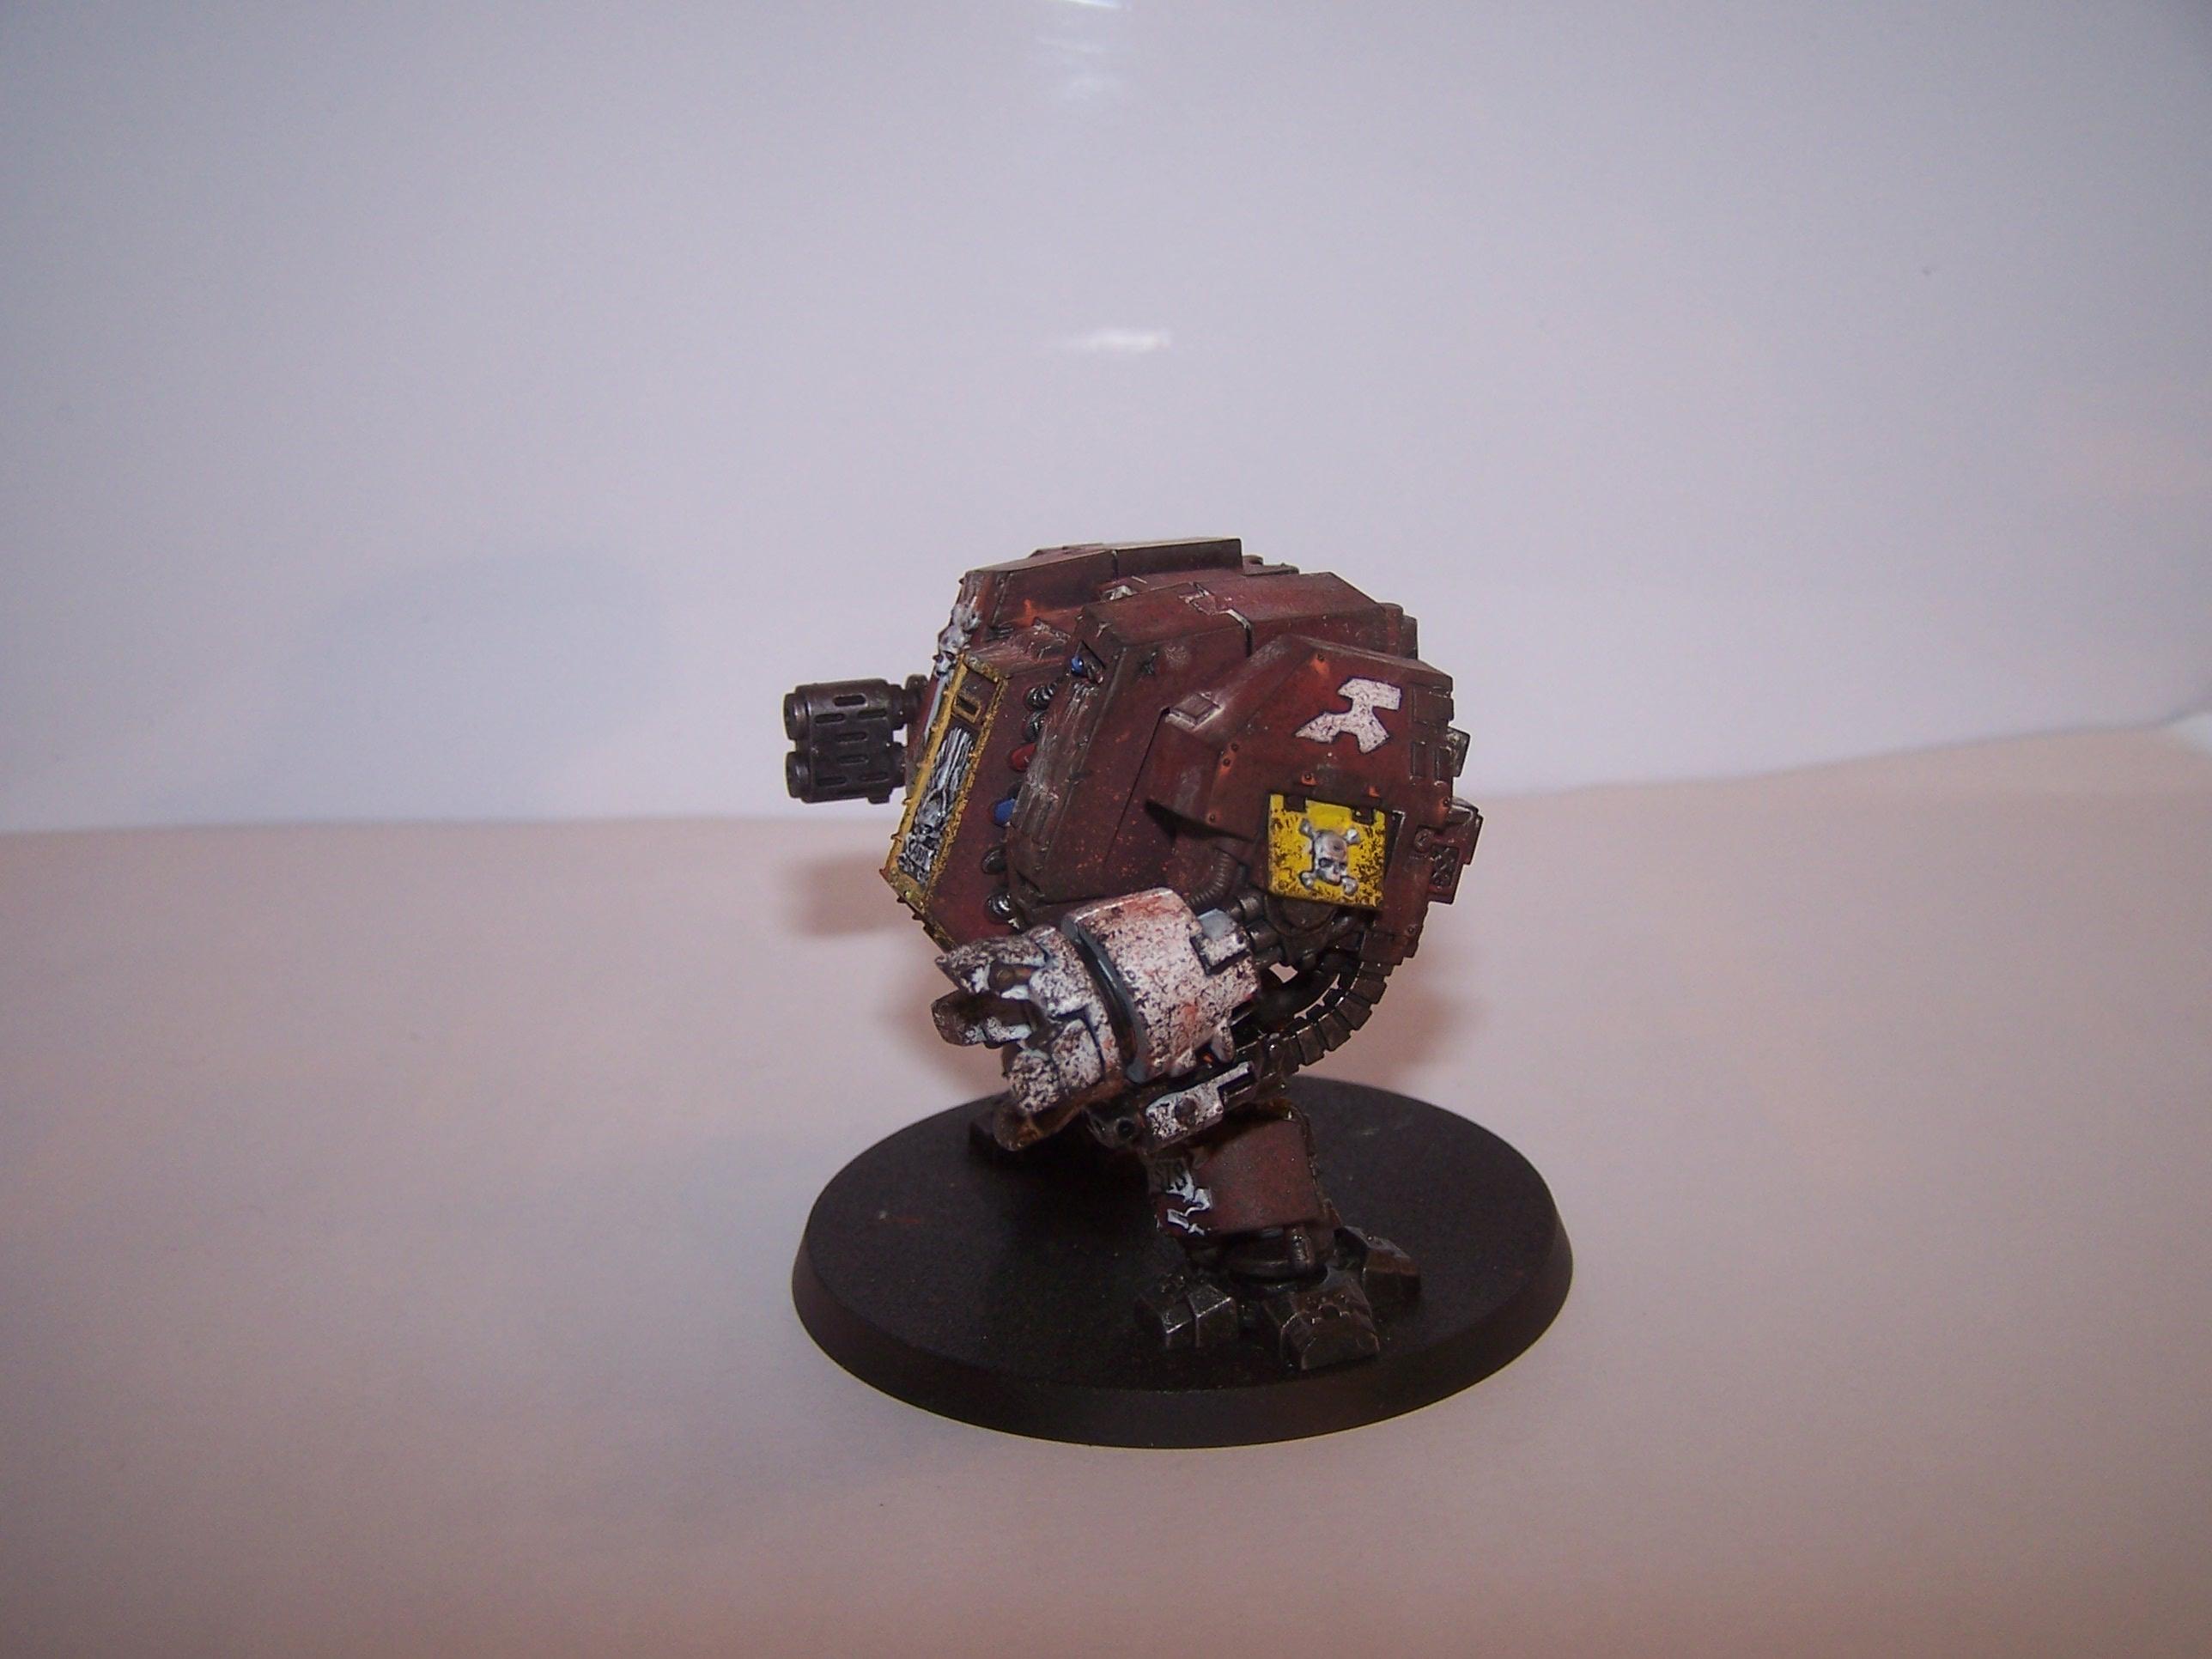 Dreadnought, Weathered, Work In Progress